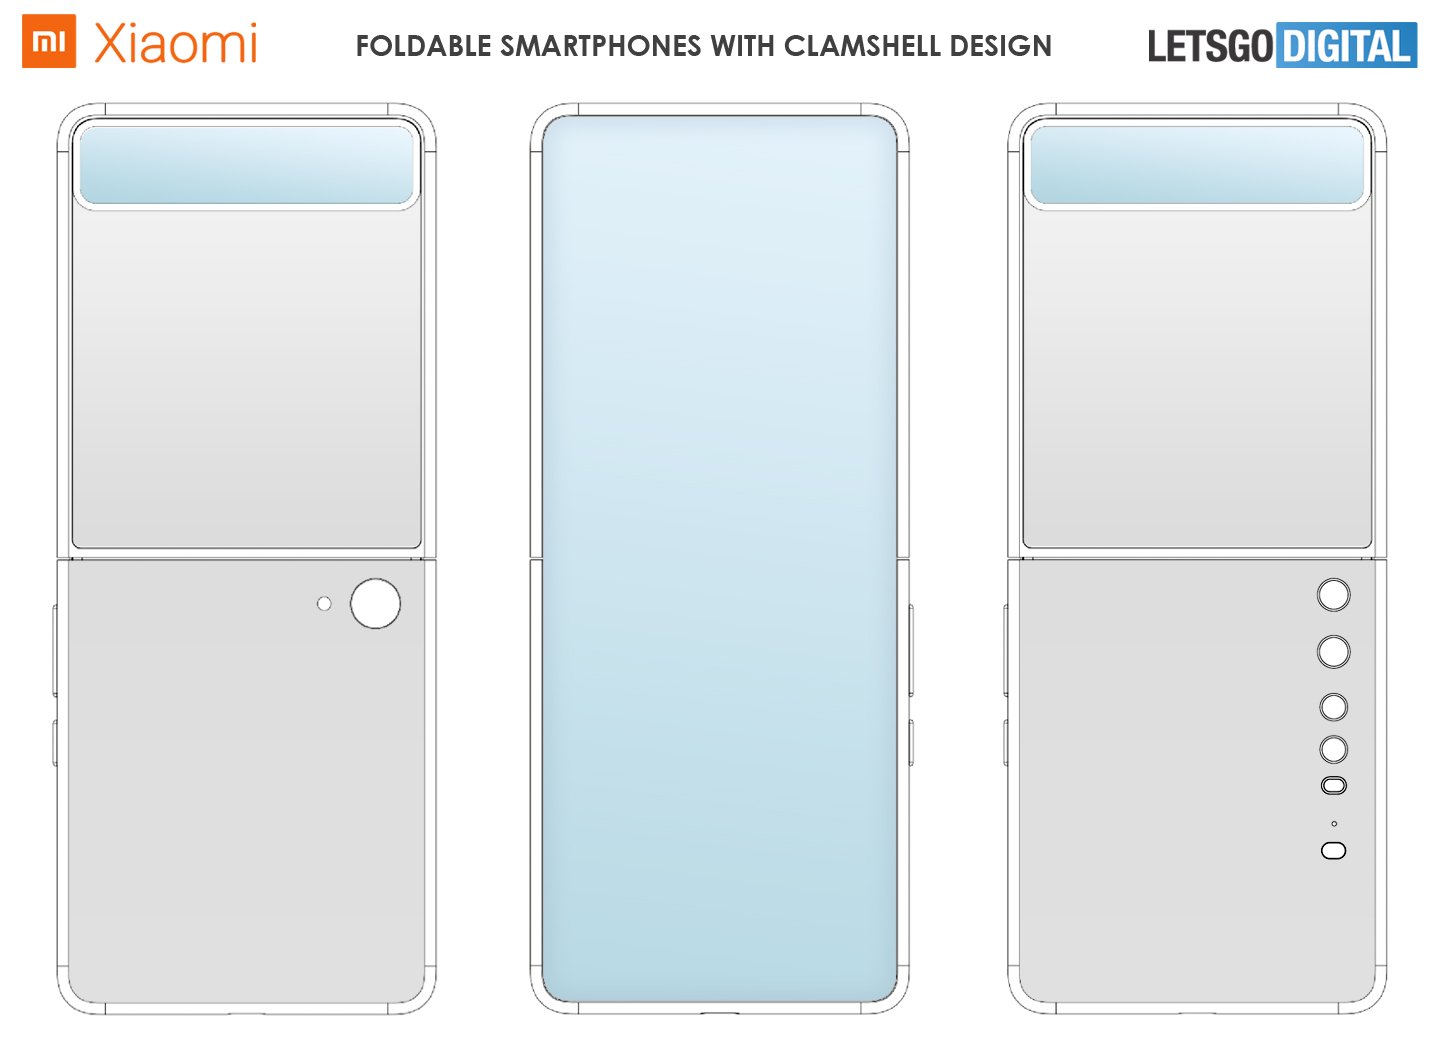 Xiaomi Clamshell Foldable Smartphone Design Patent 01